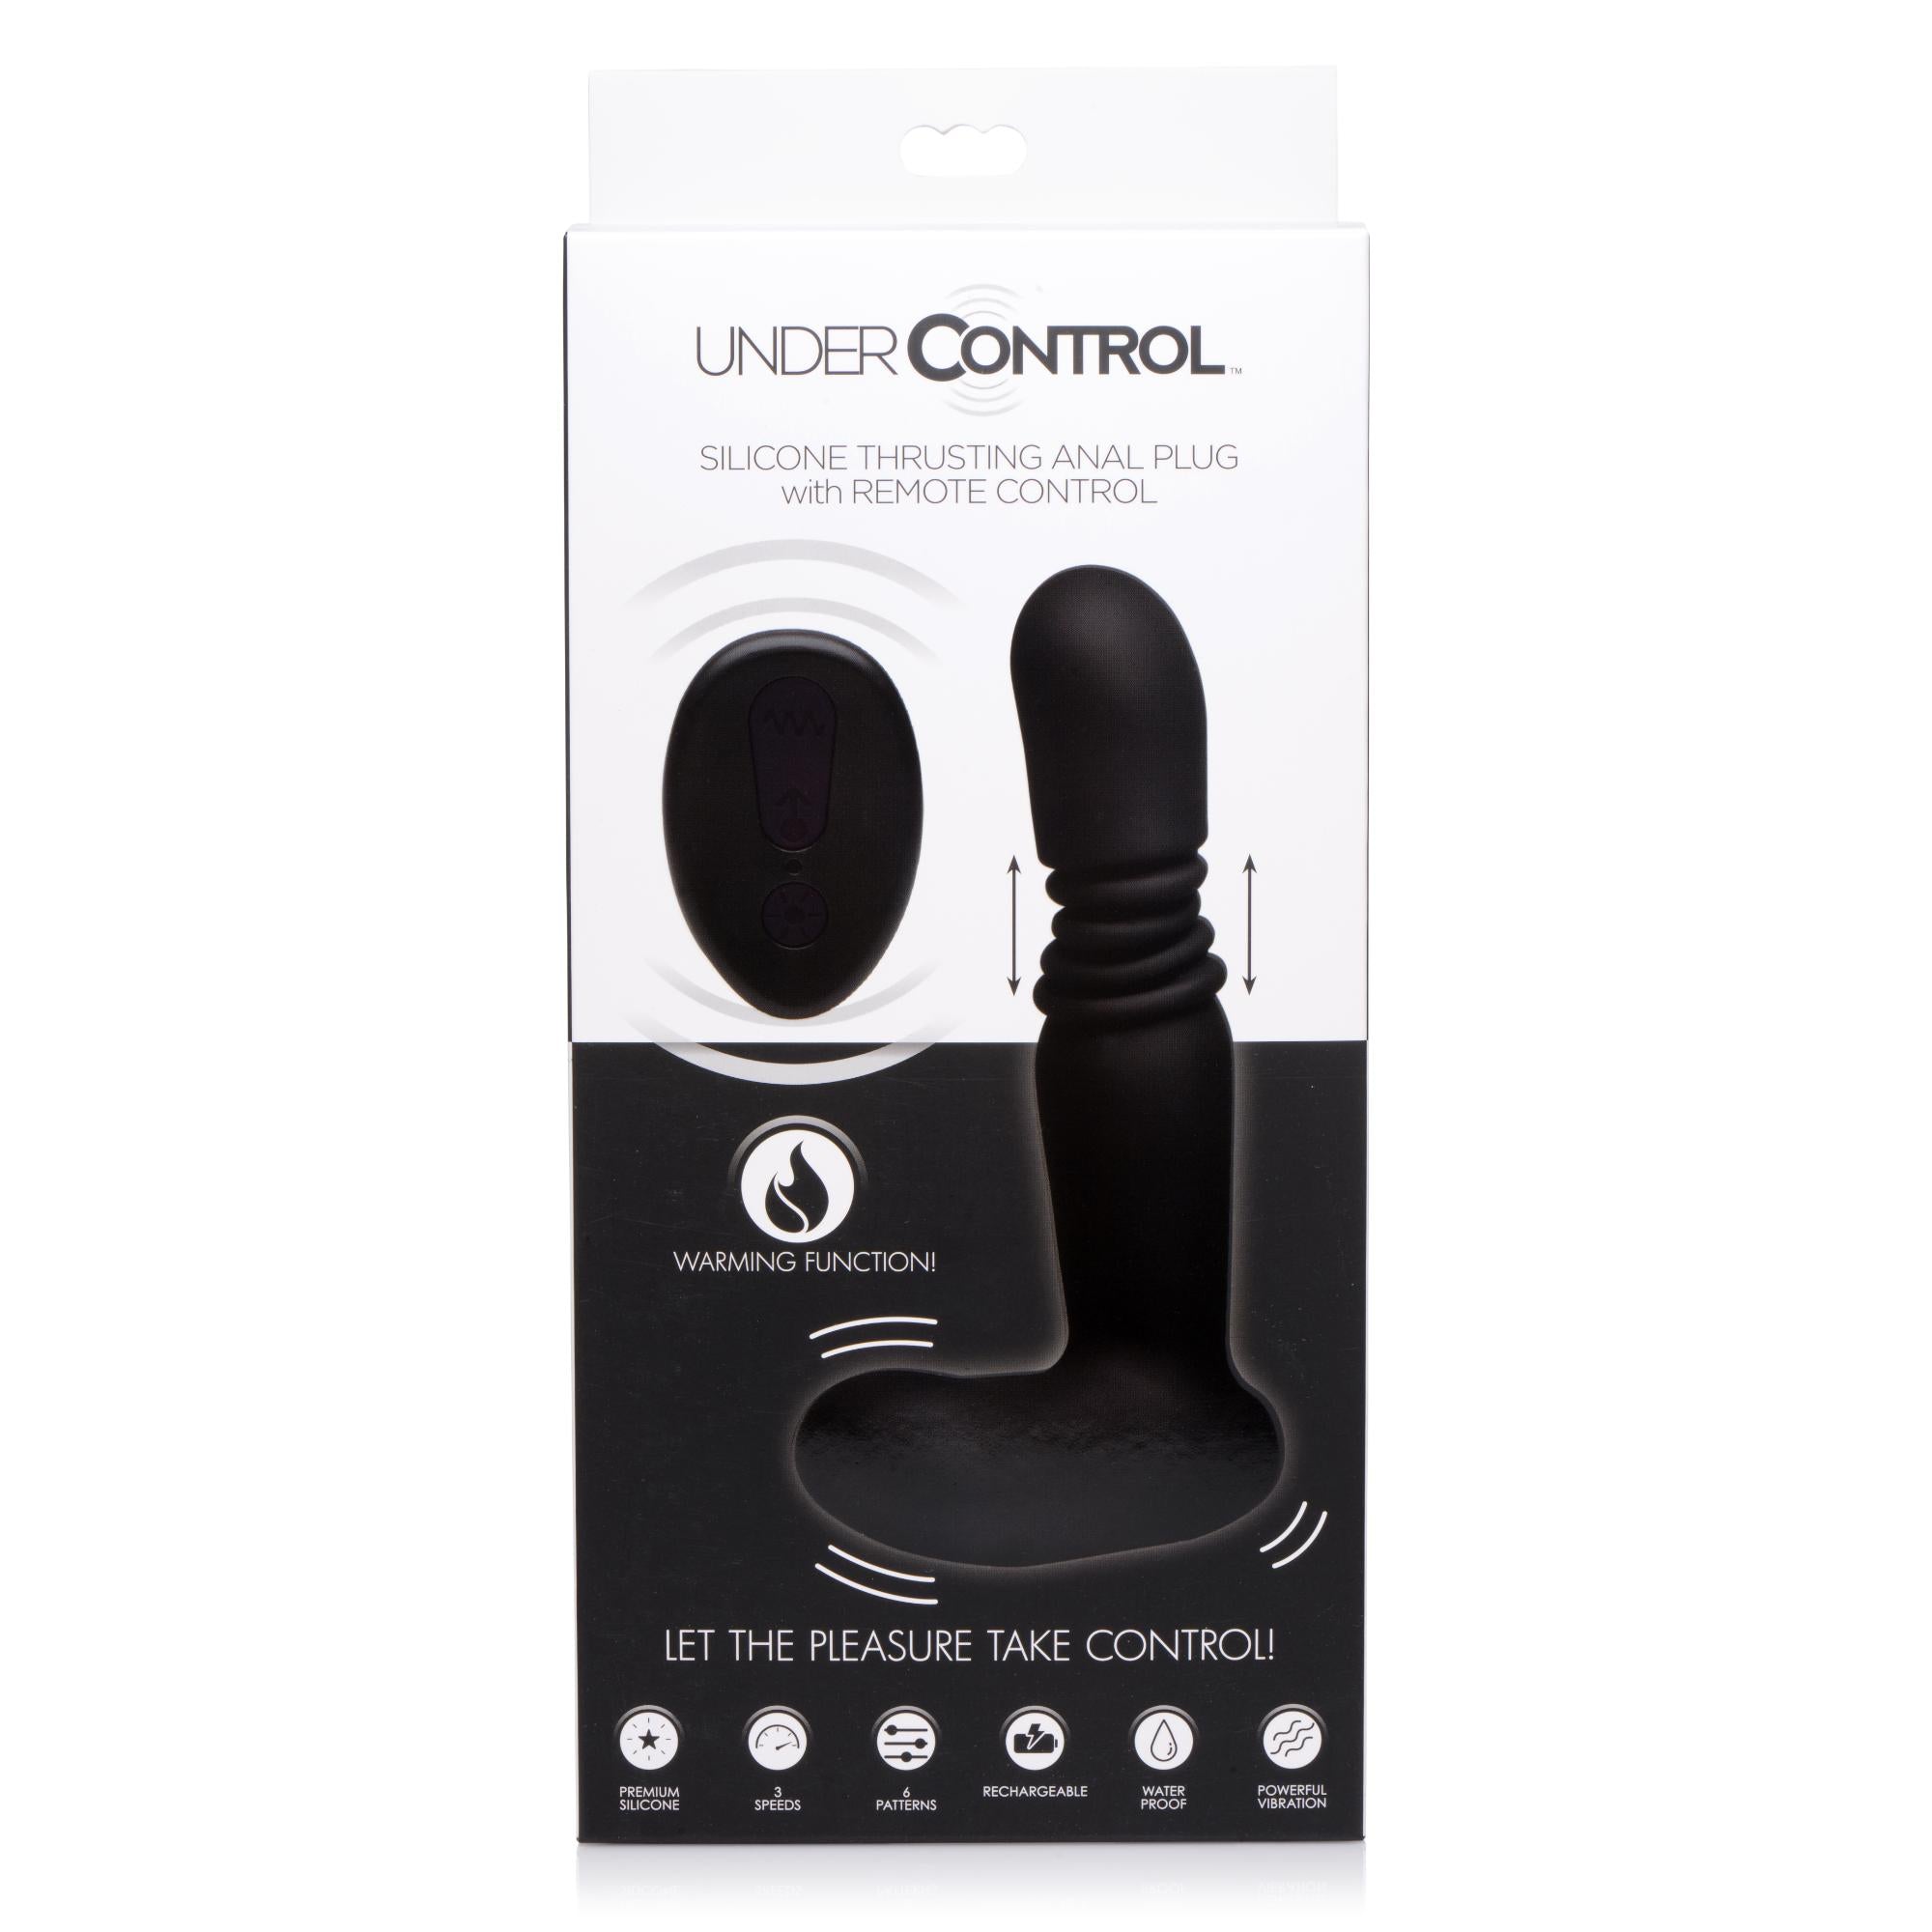 Under Control Silicone Thrusting Anal Plug with Remote Control